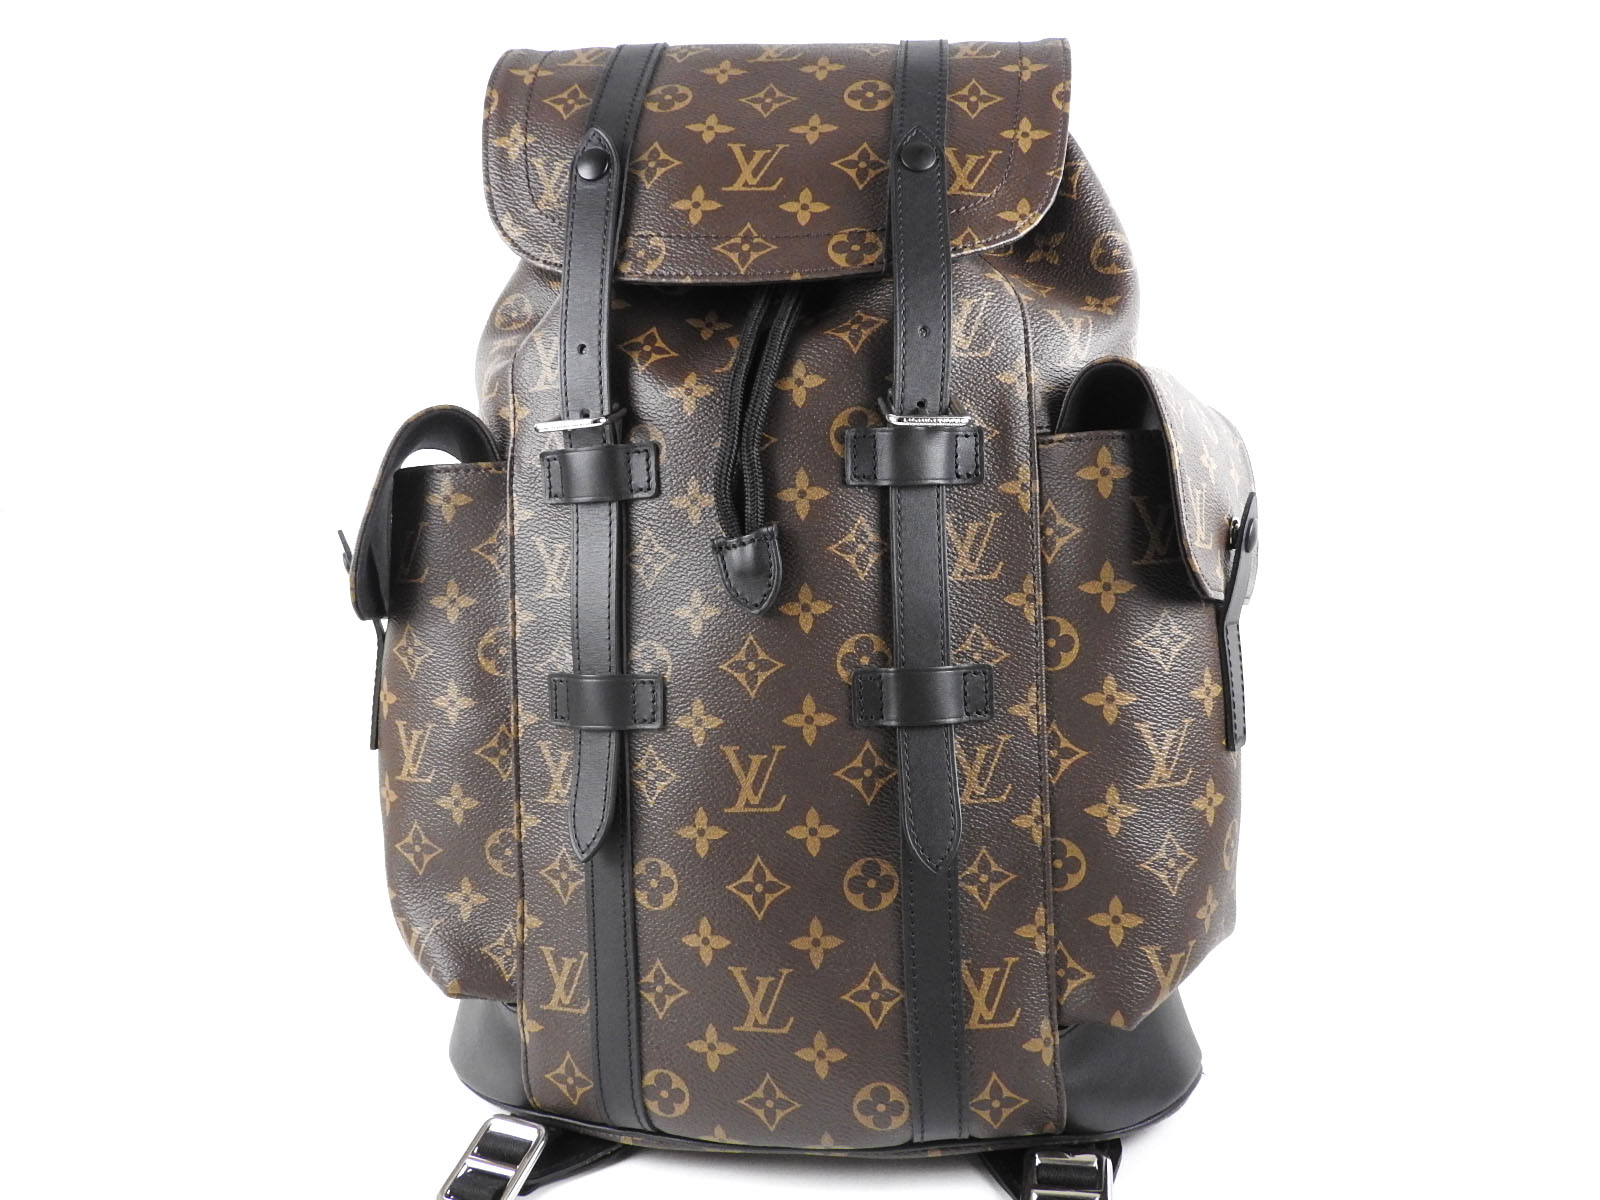 Louis Vuitton Christopher Backpack Price Guide | semashow.com